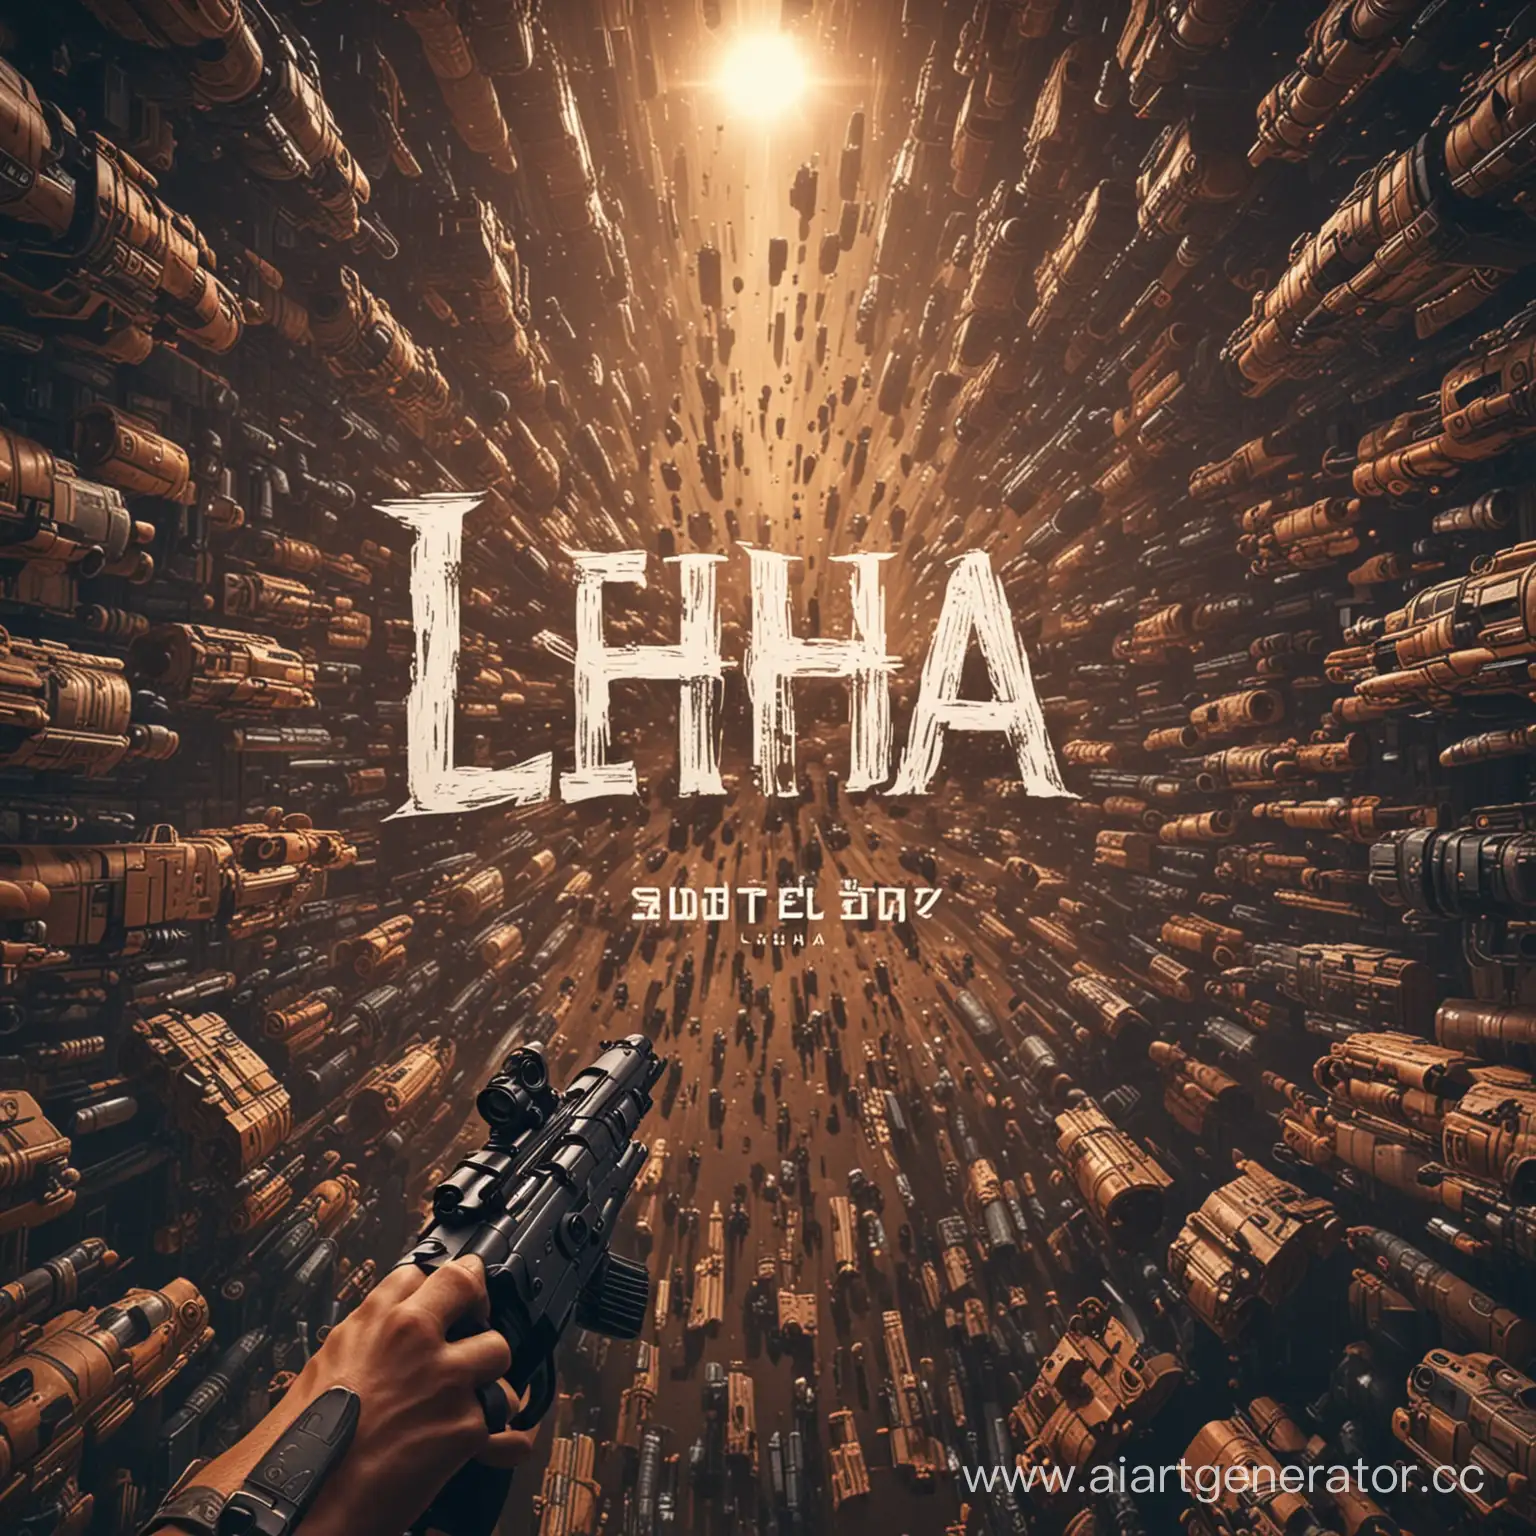 Urban-Shooter-Video-Game-Background-with-LeHHa-Text